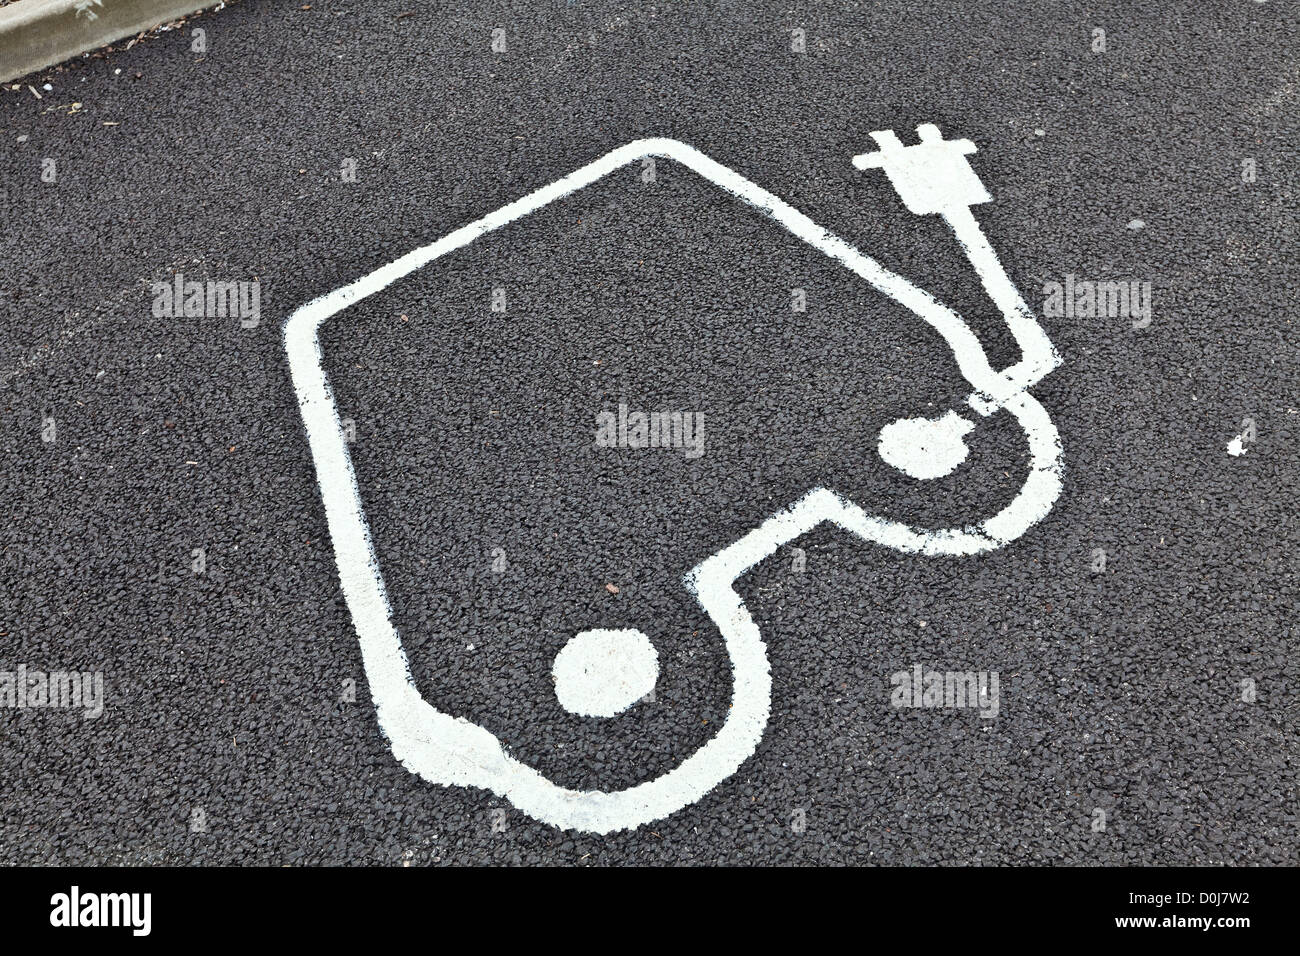 Painted road sign indicating electric car recharging point. Stock Photo